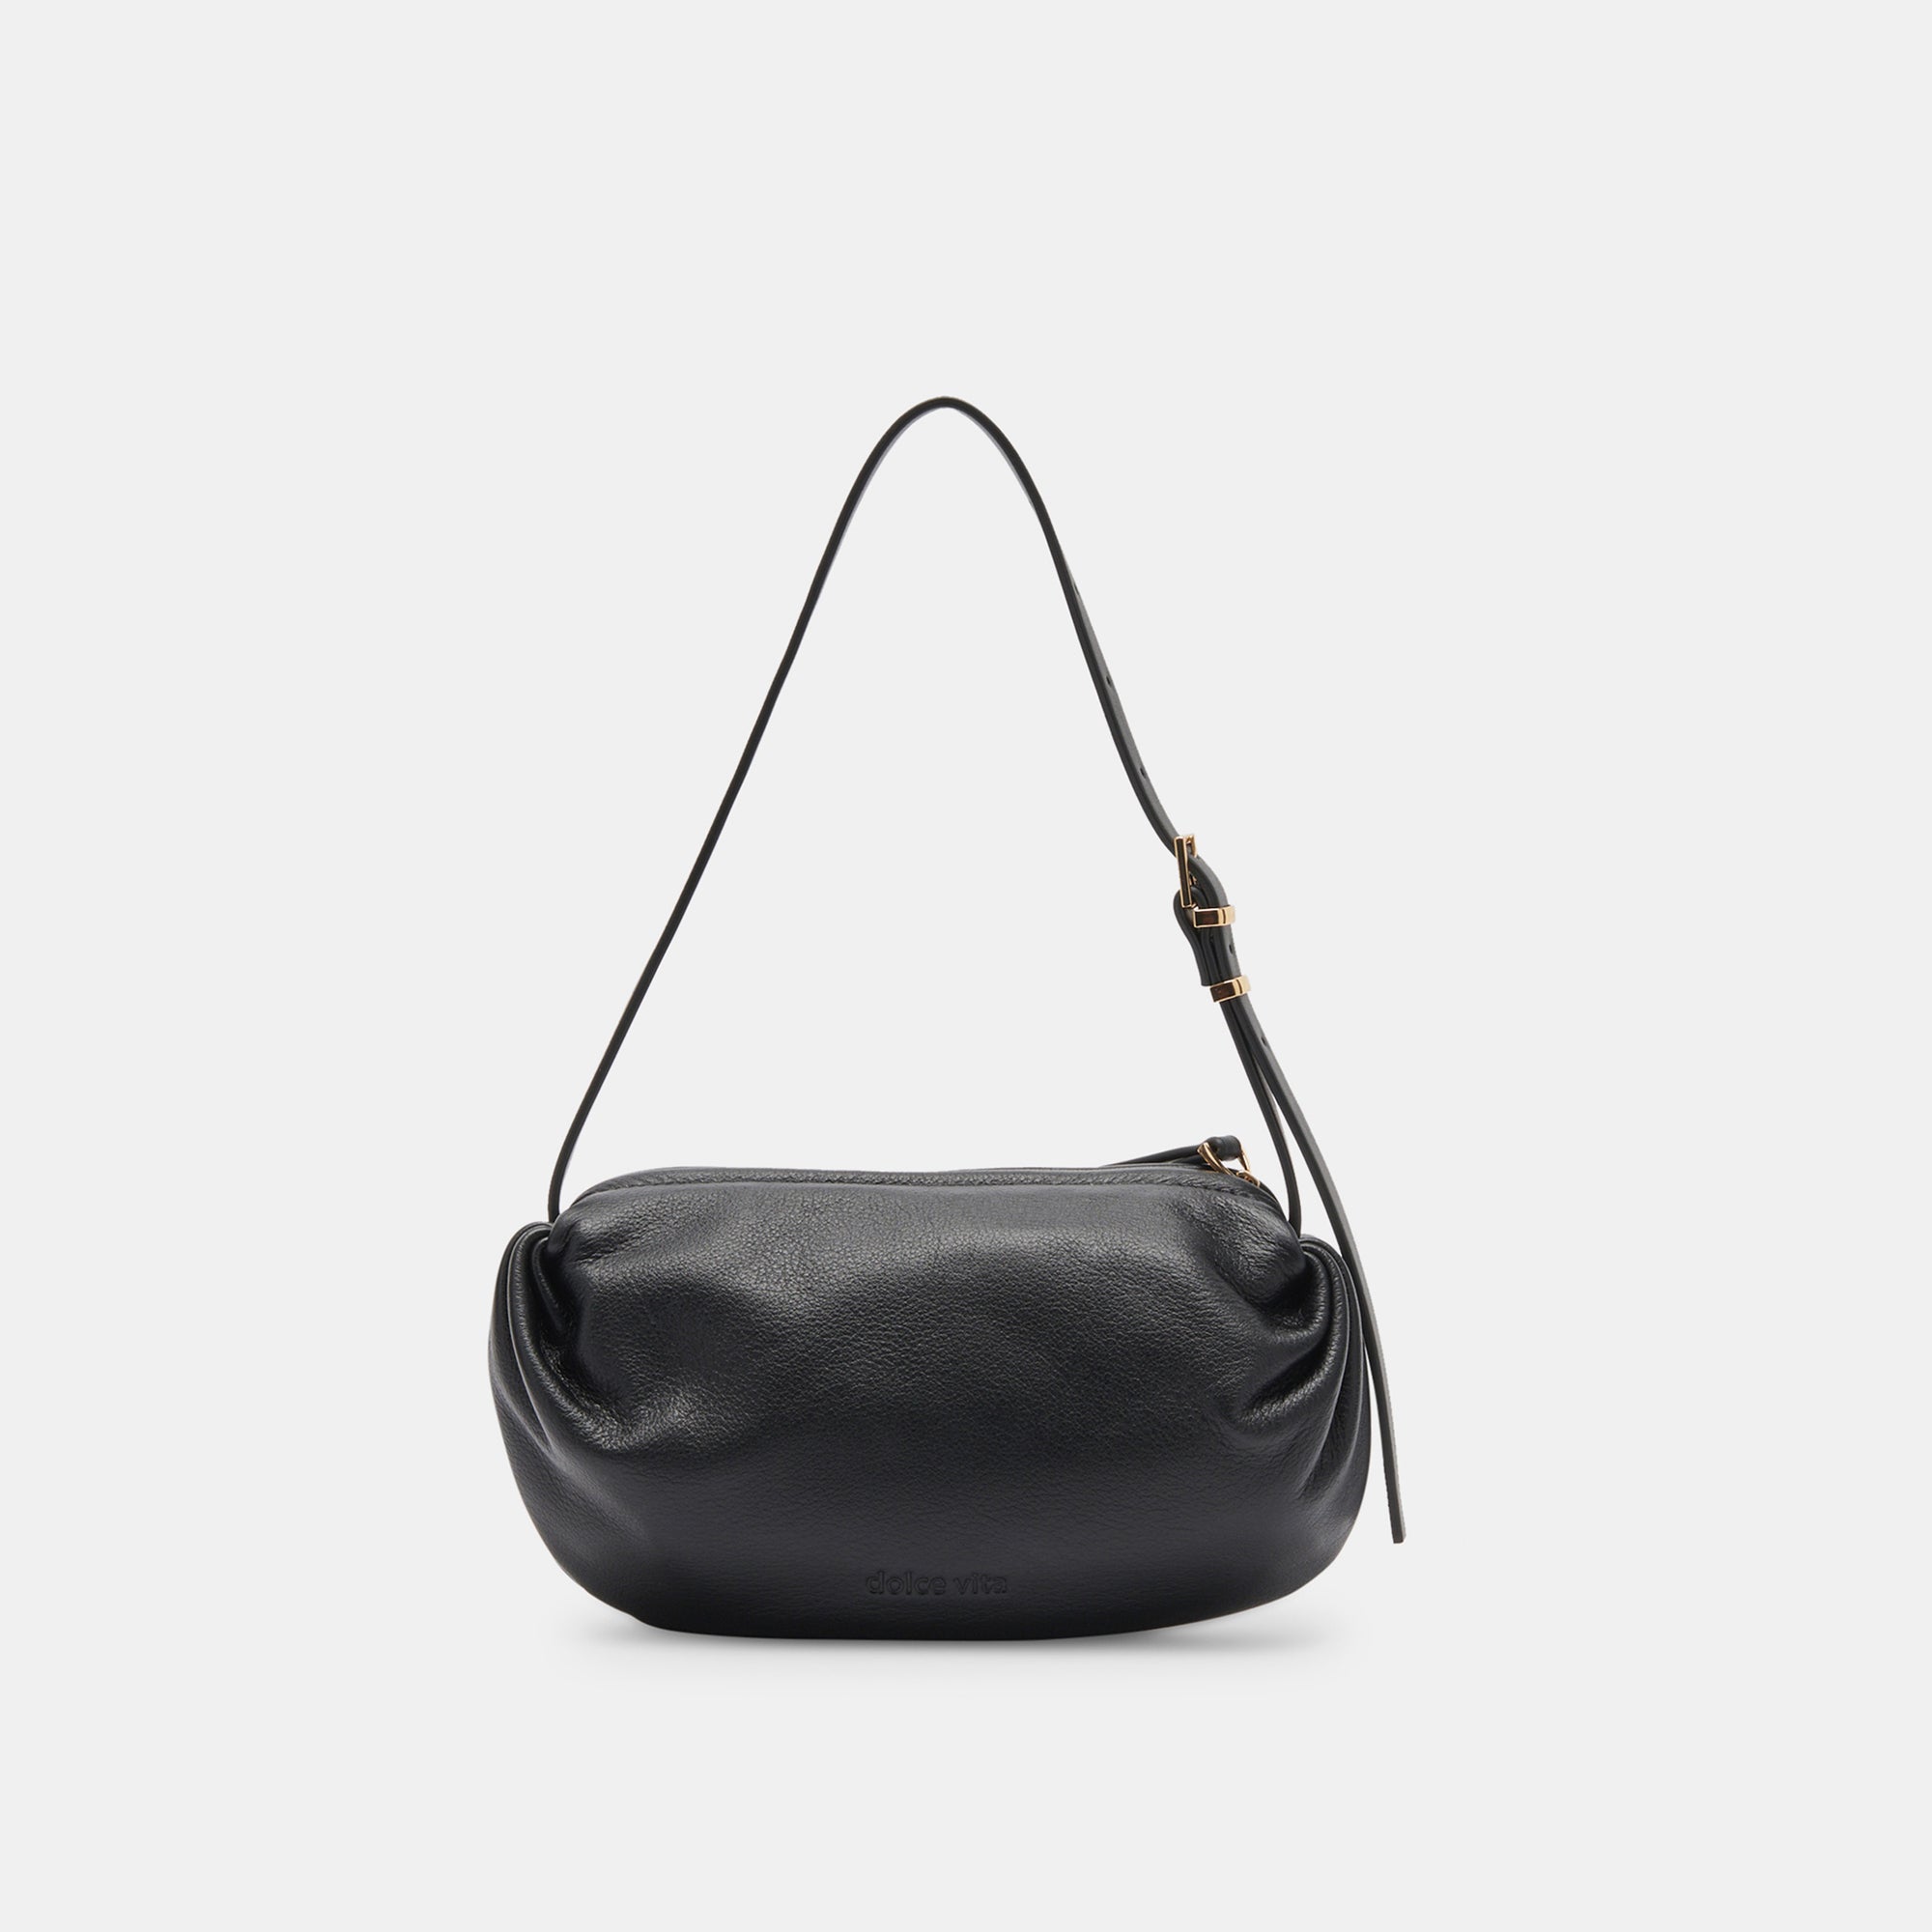 New with Tag Dolce Vita Collection Black Crossbody